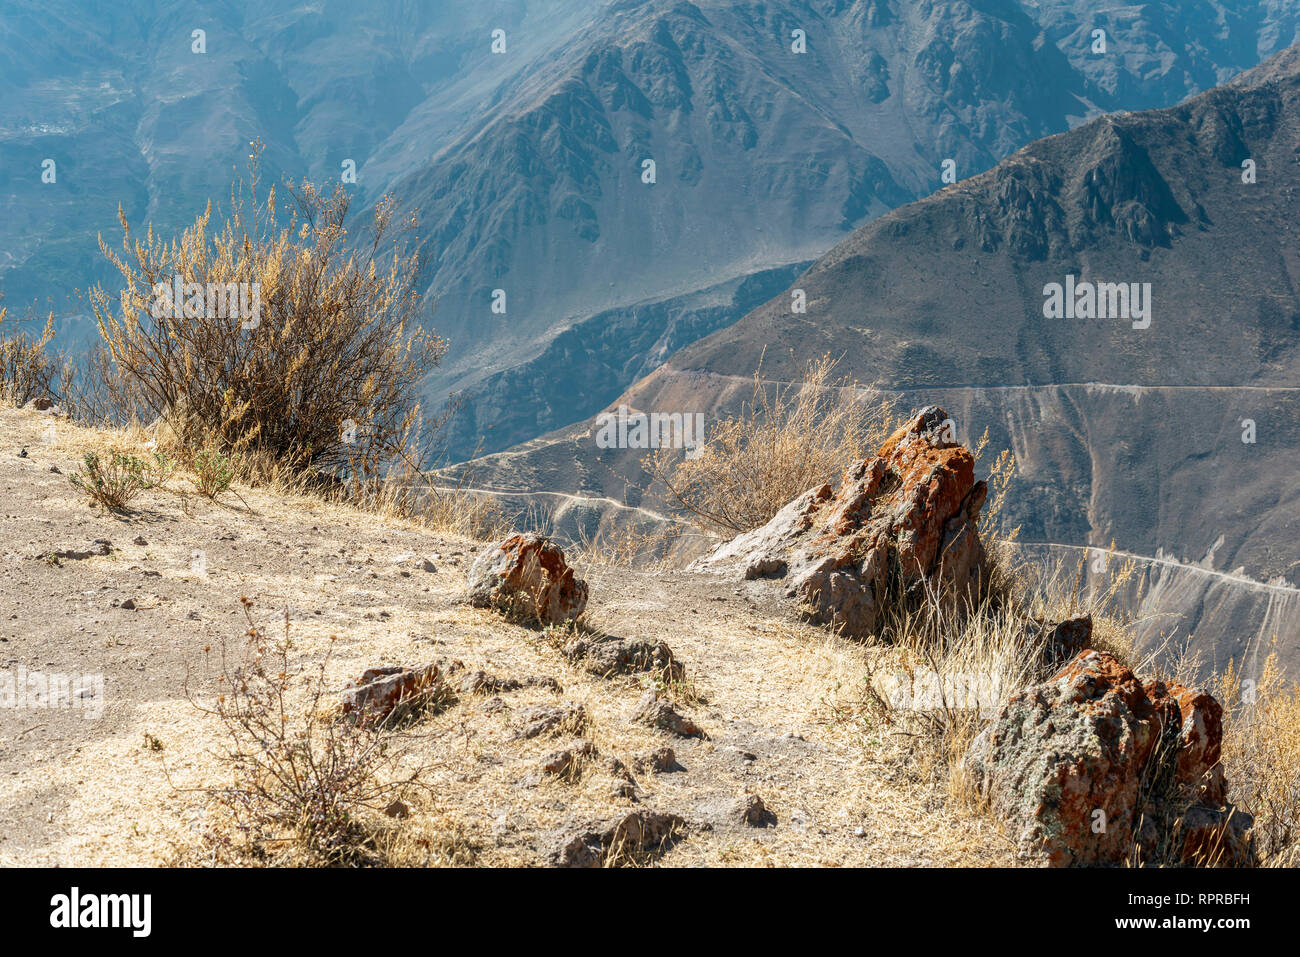 cliff with bush and mossy boulders in Peruvian mountains Stock Photo